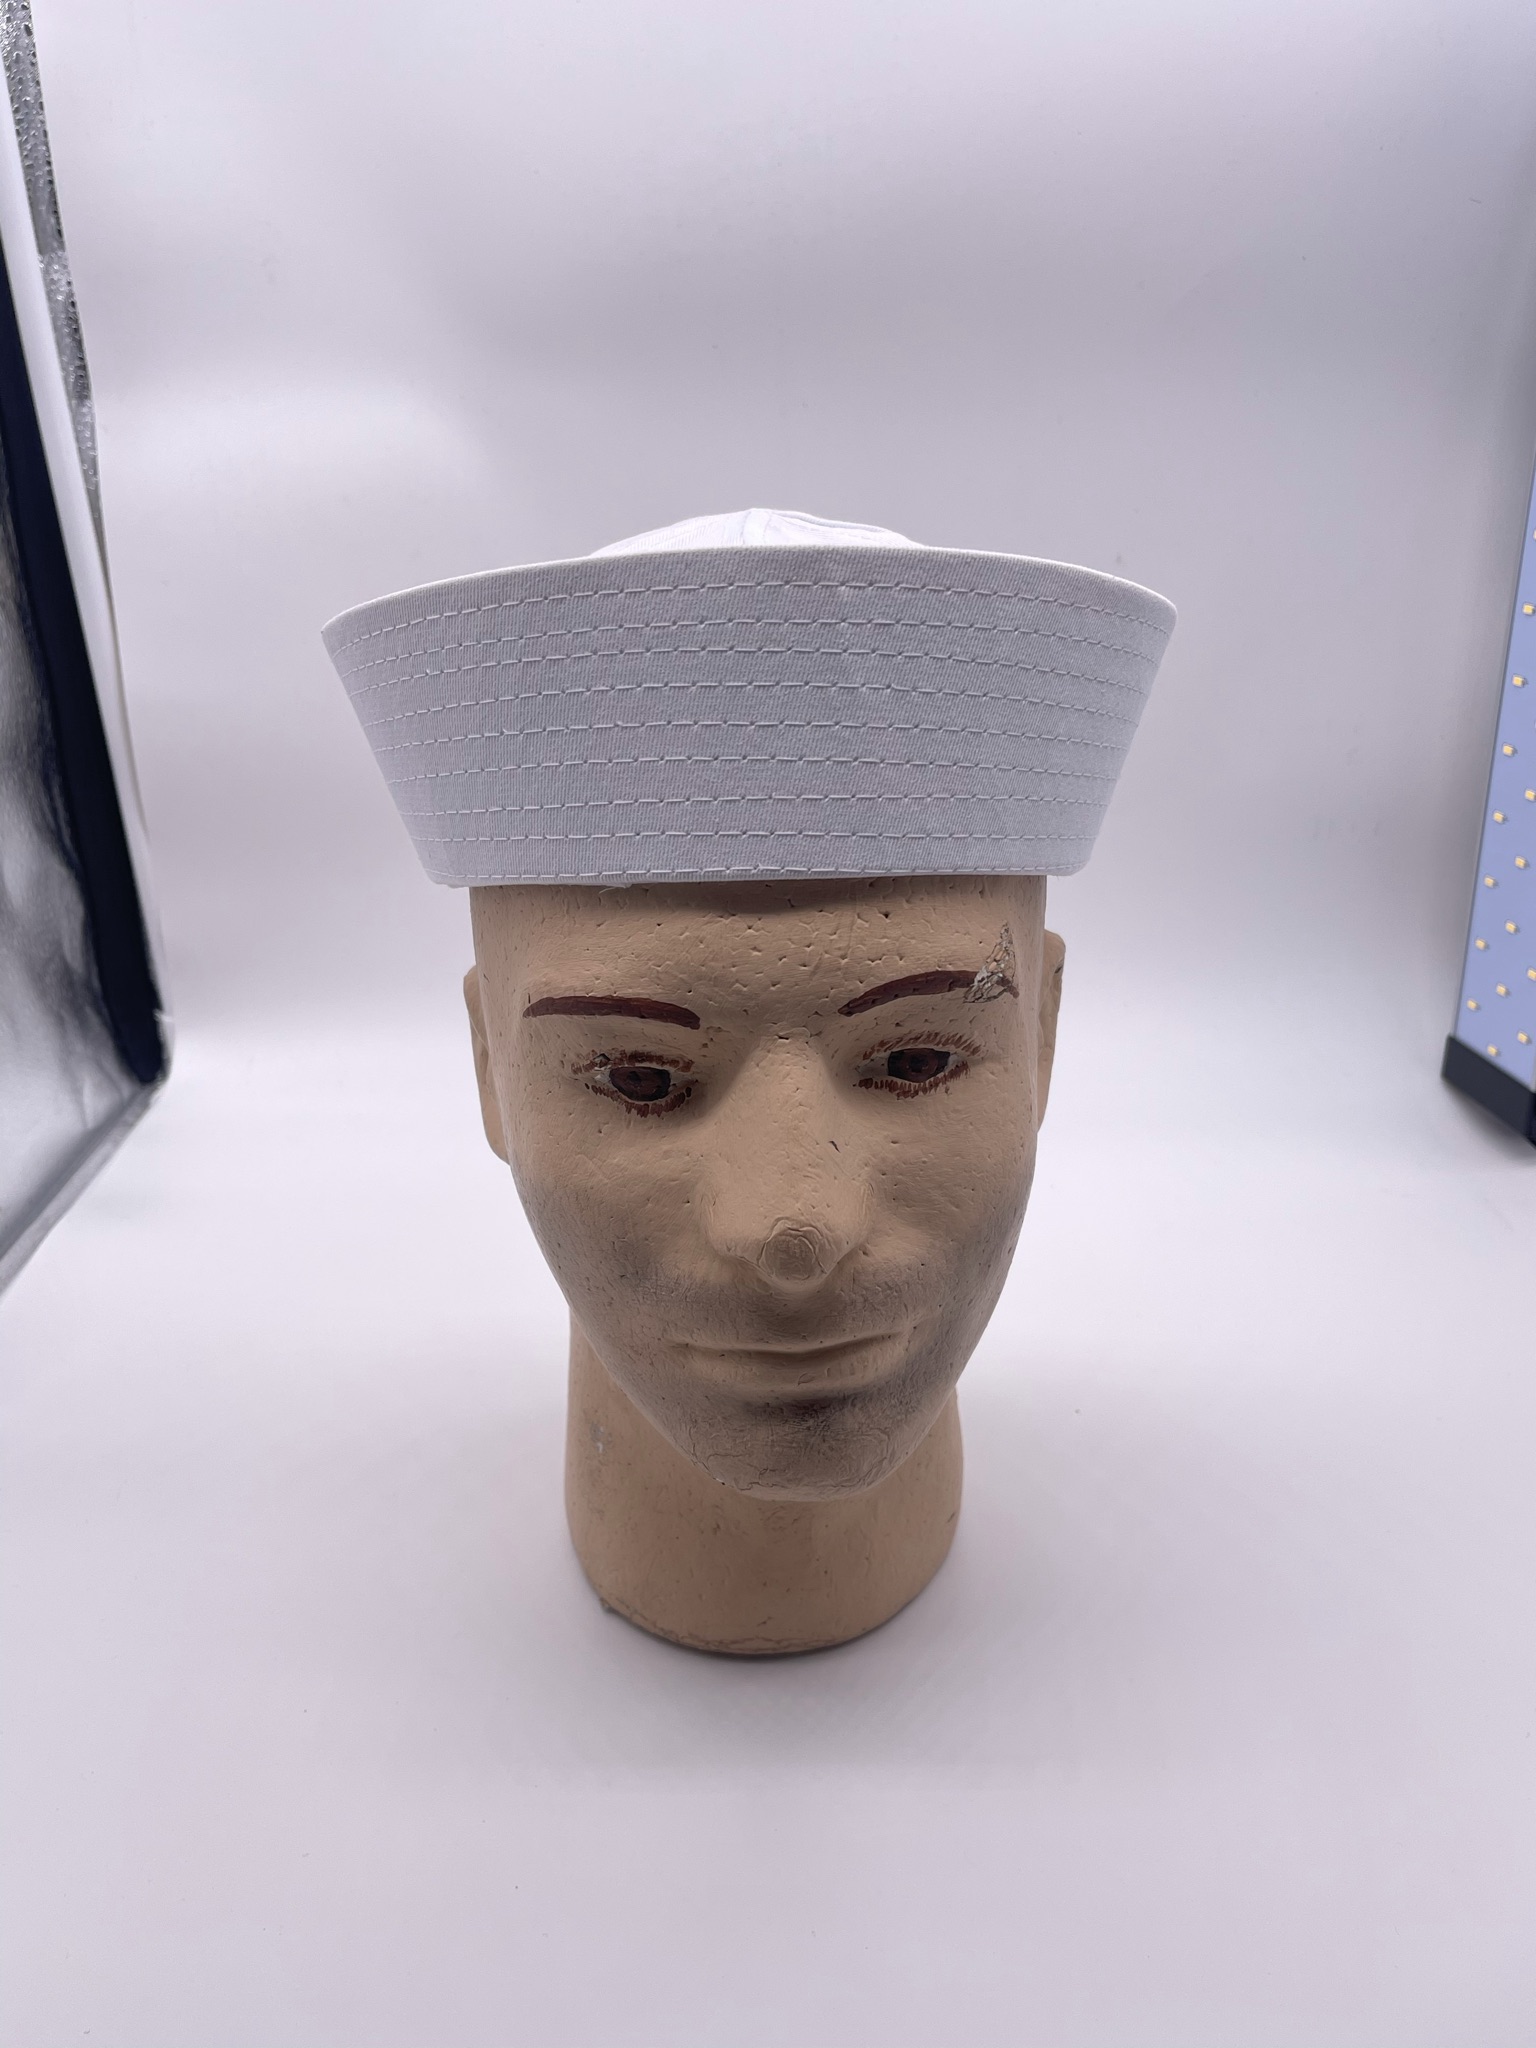 Featured image for “Sailor Hat”